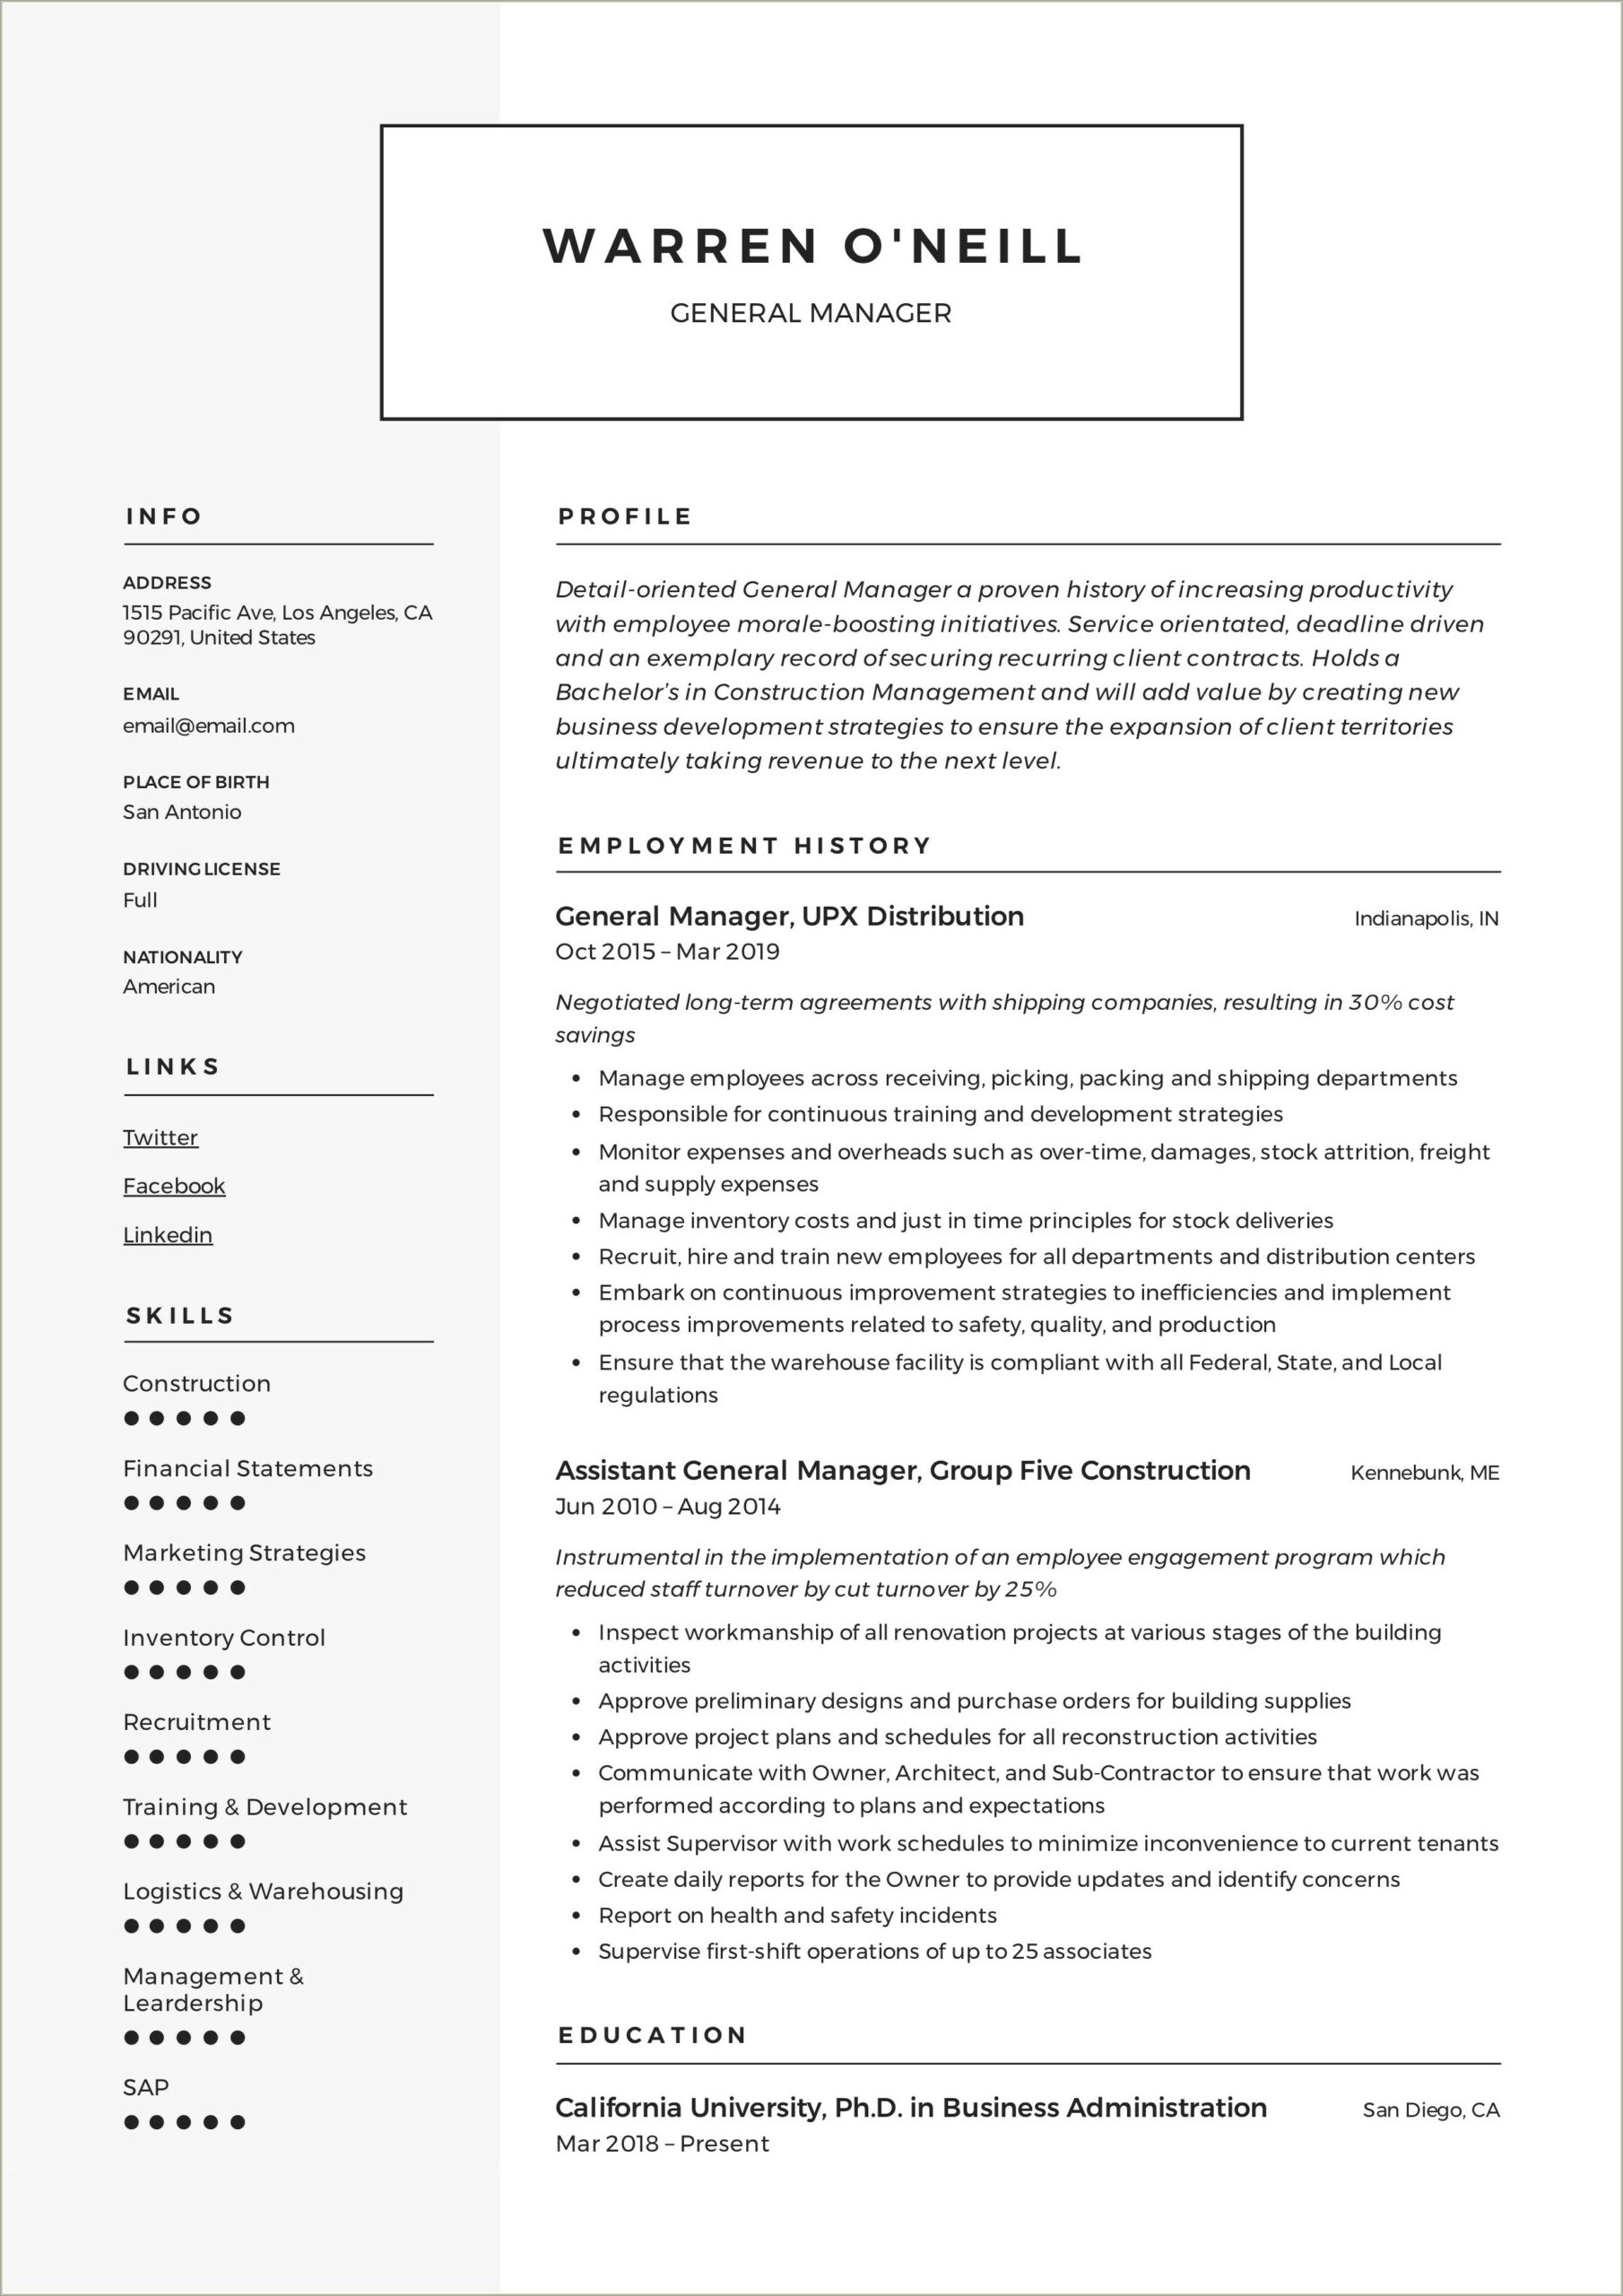 Drafted Employee Handbook For General Manager Resume Skills